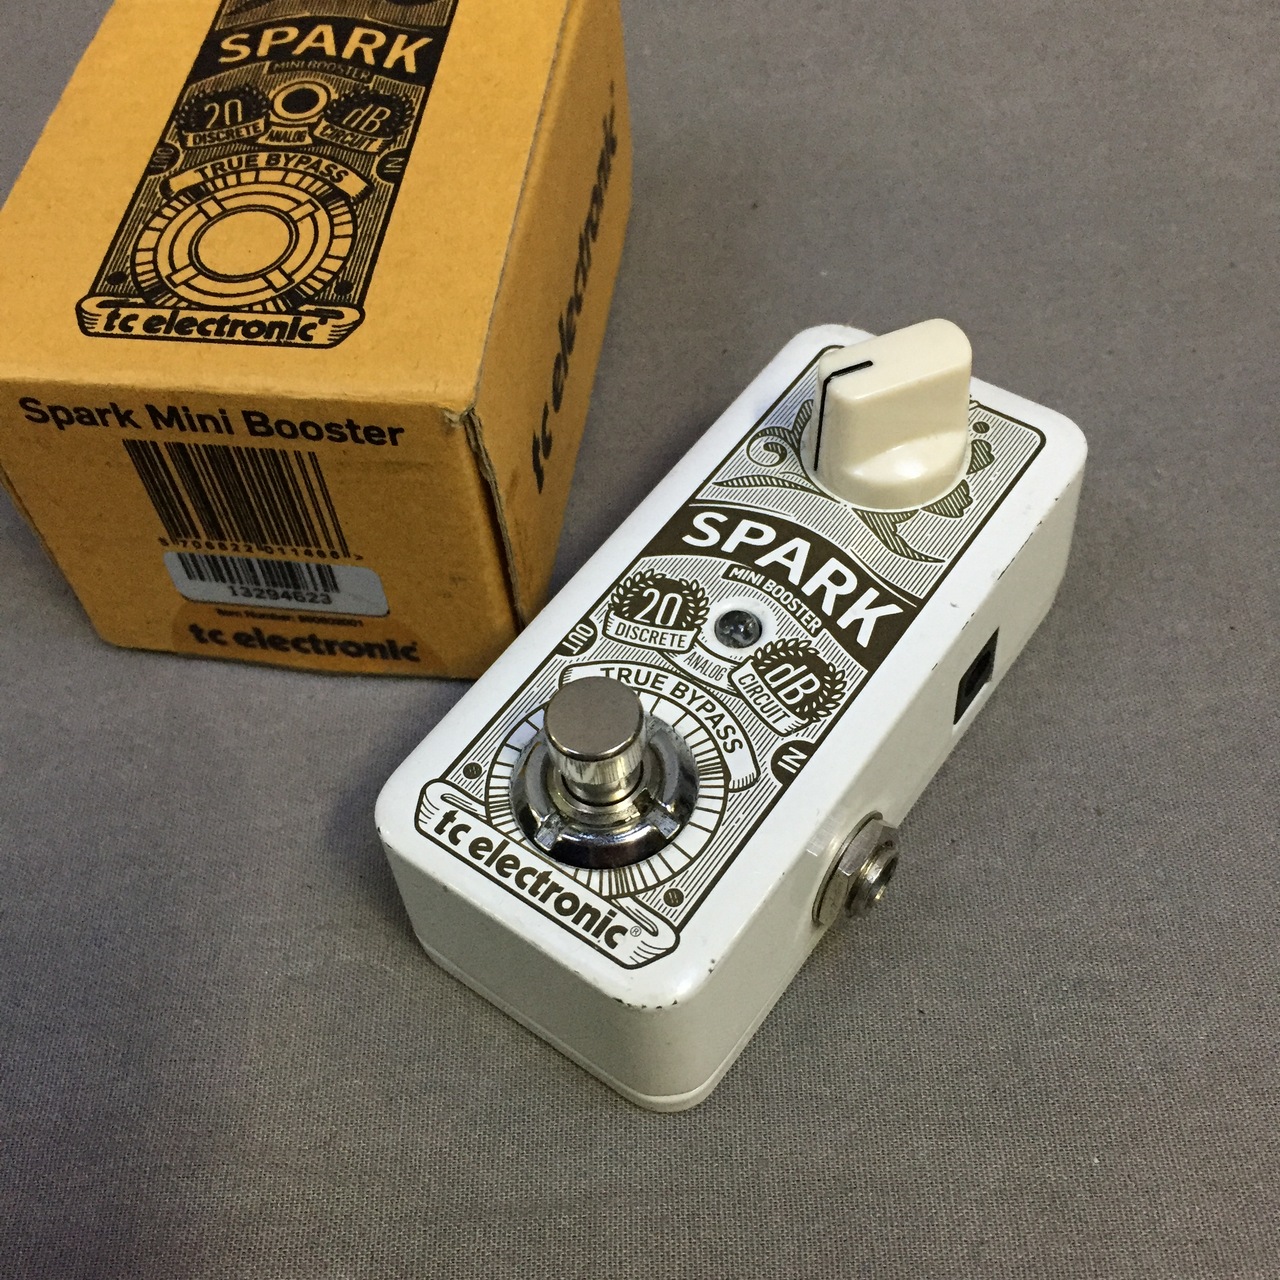 SPARK MINI BOOSTER / t.c. electronic